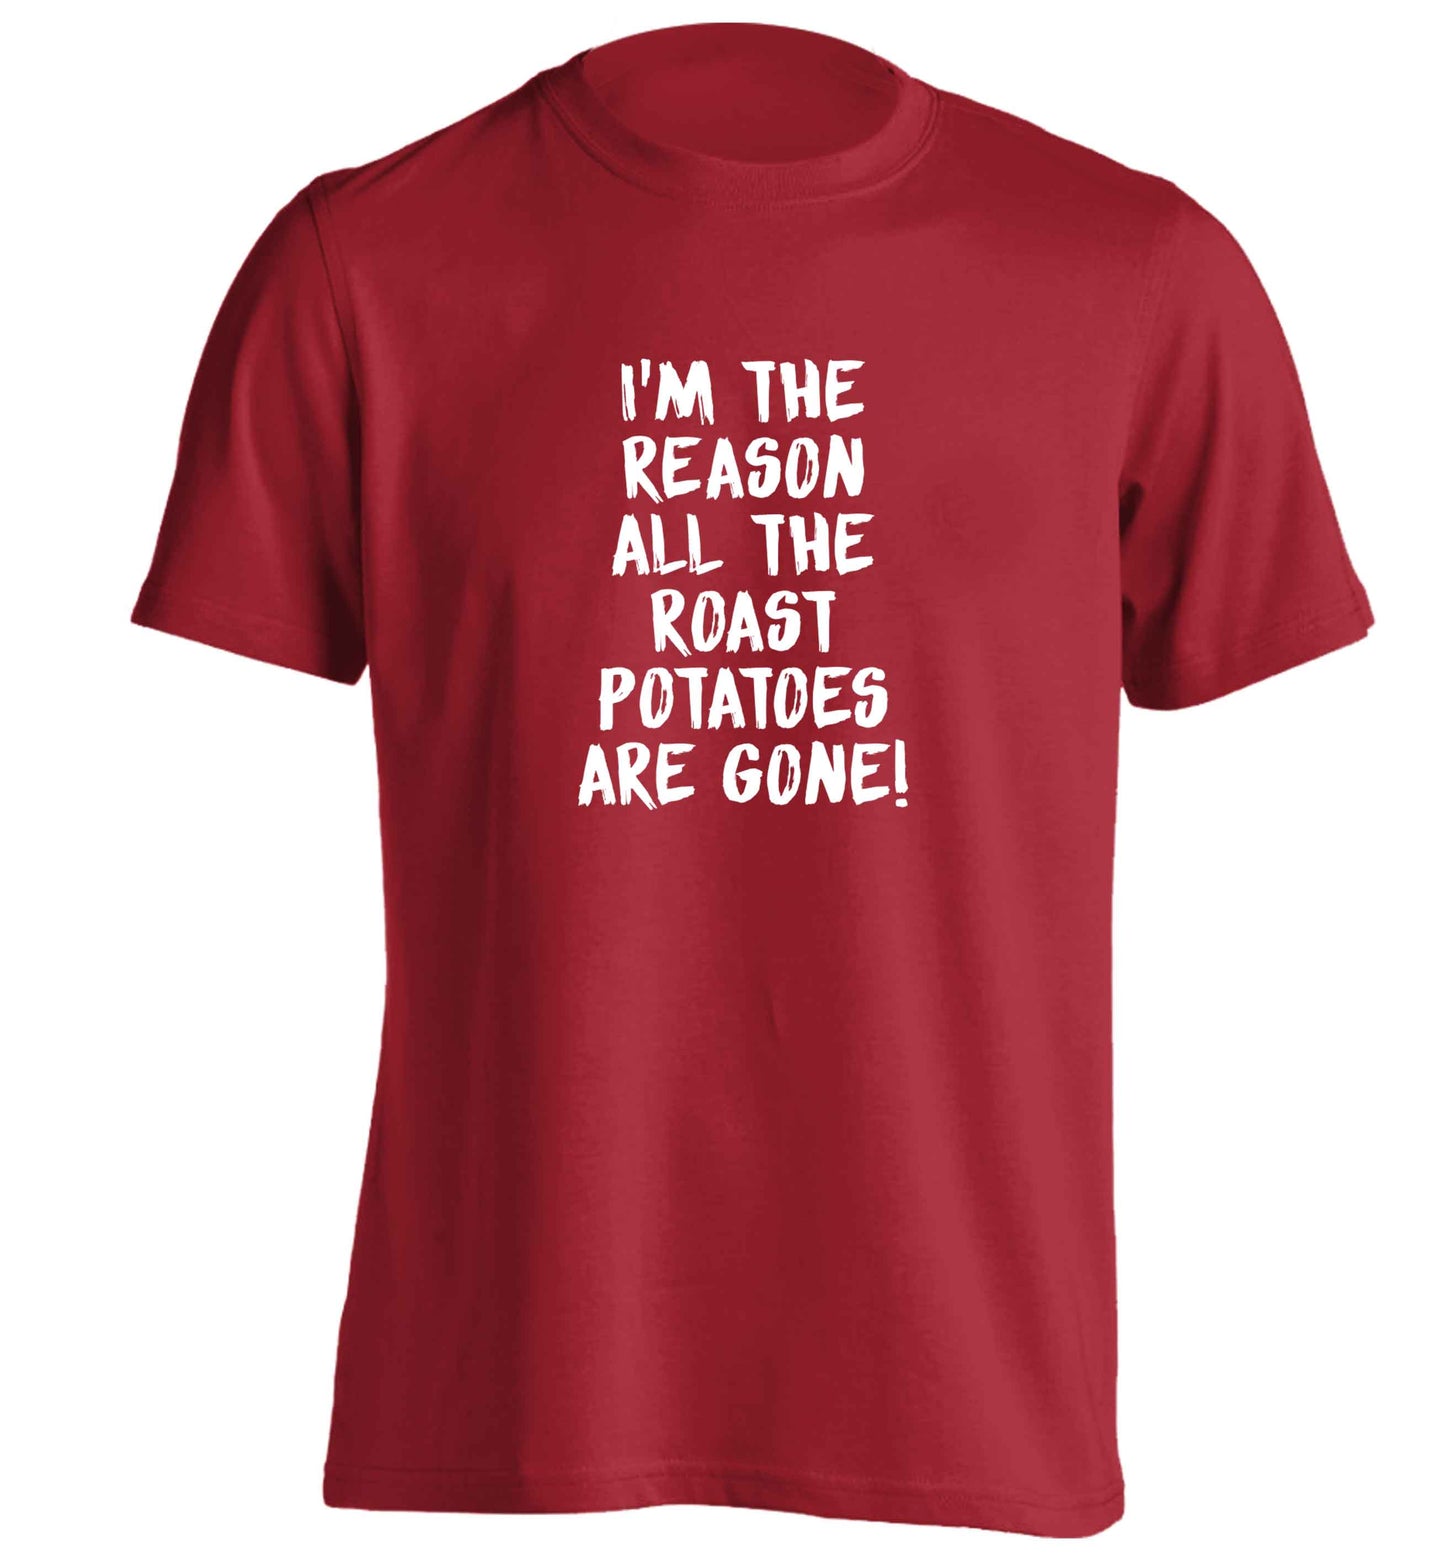 I'm the reason all the roast potatoes are gone adults unisex red Tshirt 2XL